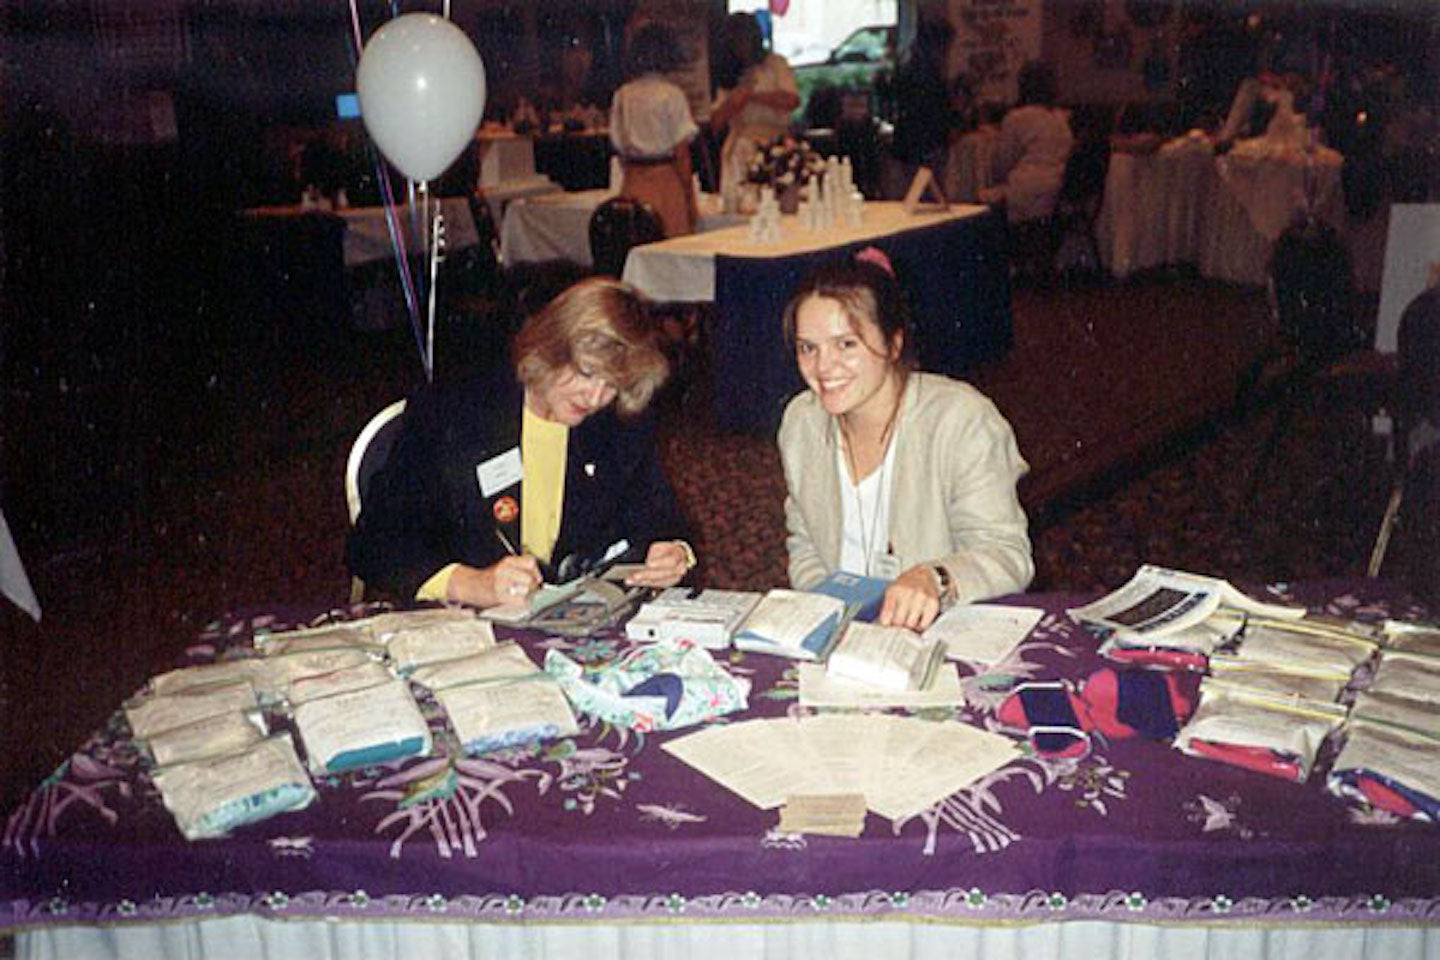 A photo from 1993 - Madeleine sits at a table displaying Lunapads products at an event.